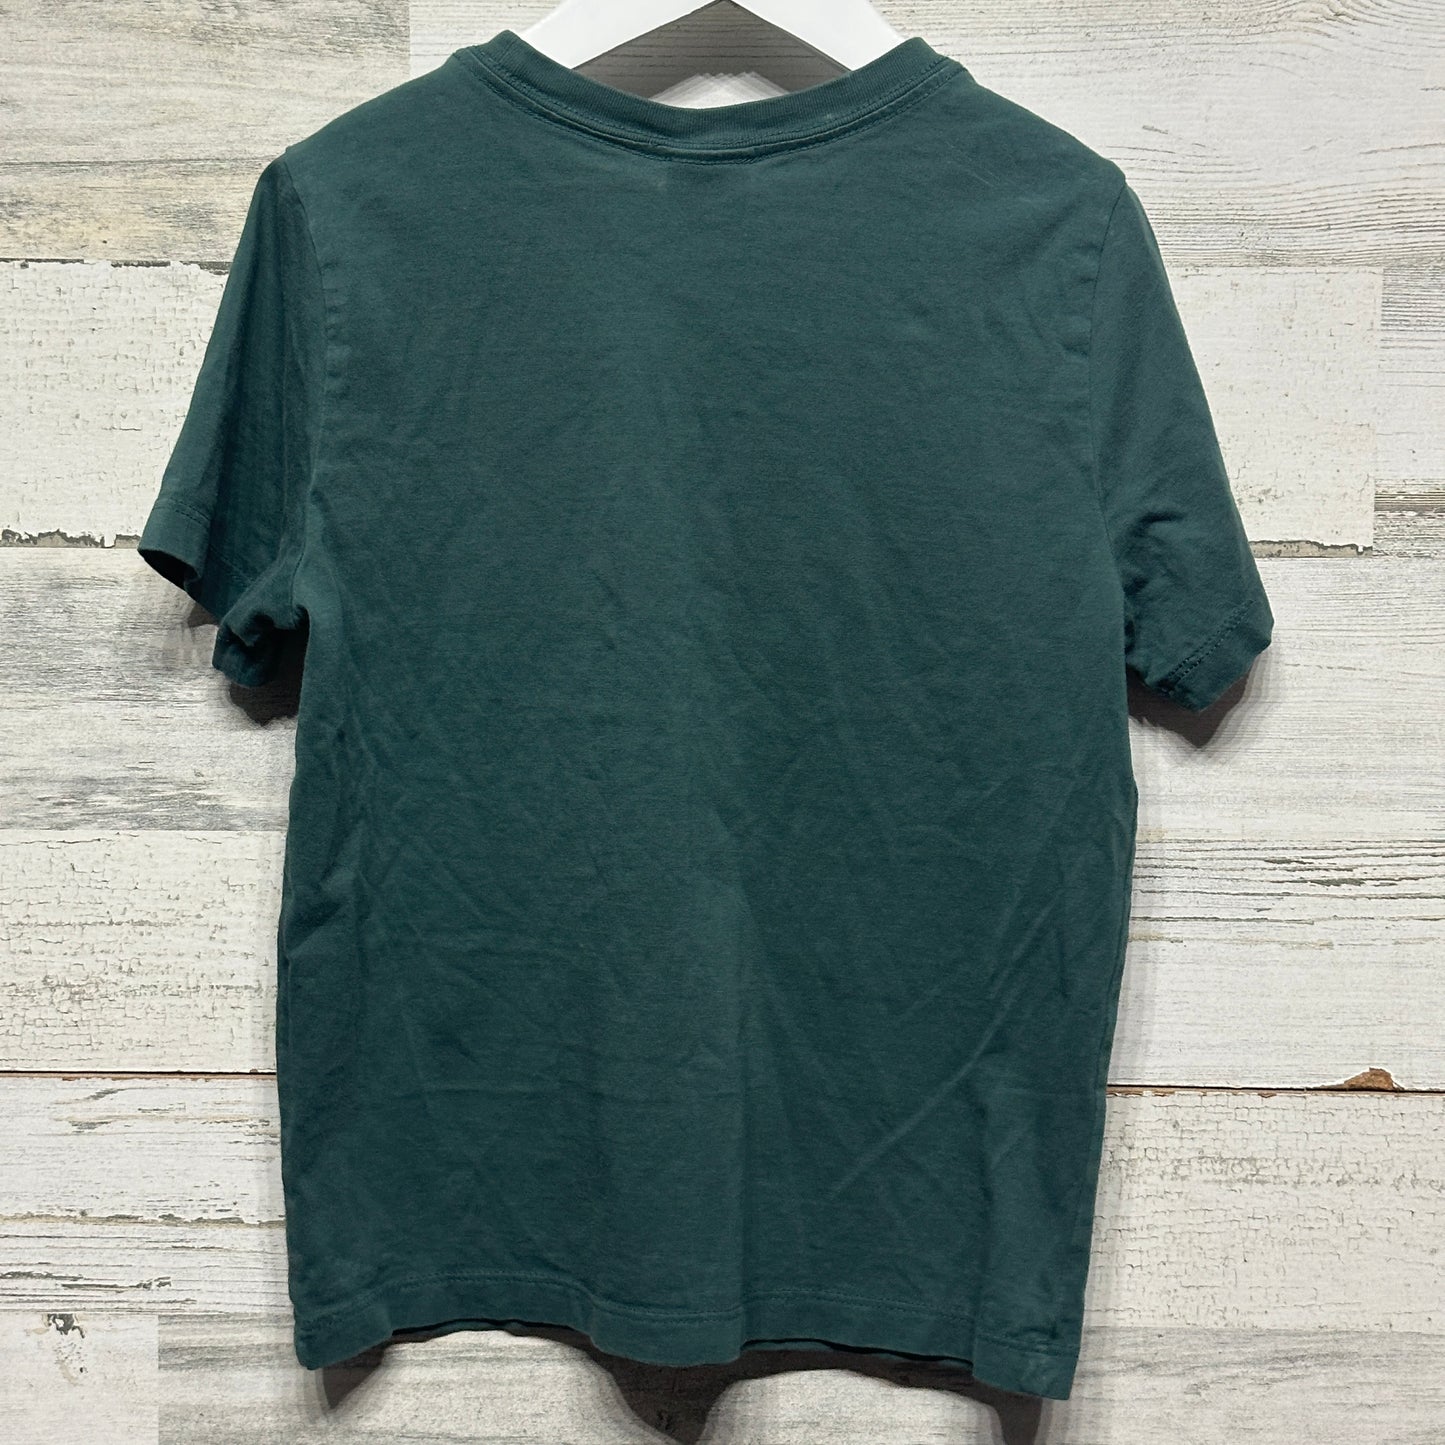 Size 5 (110 cm) Hanna Andersson Pocket Tee - Good Used Condition